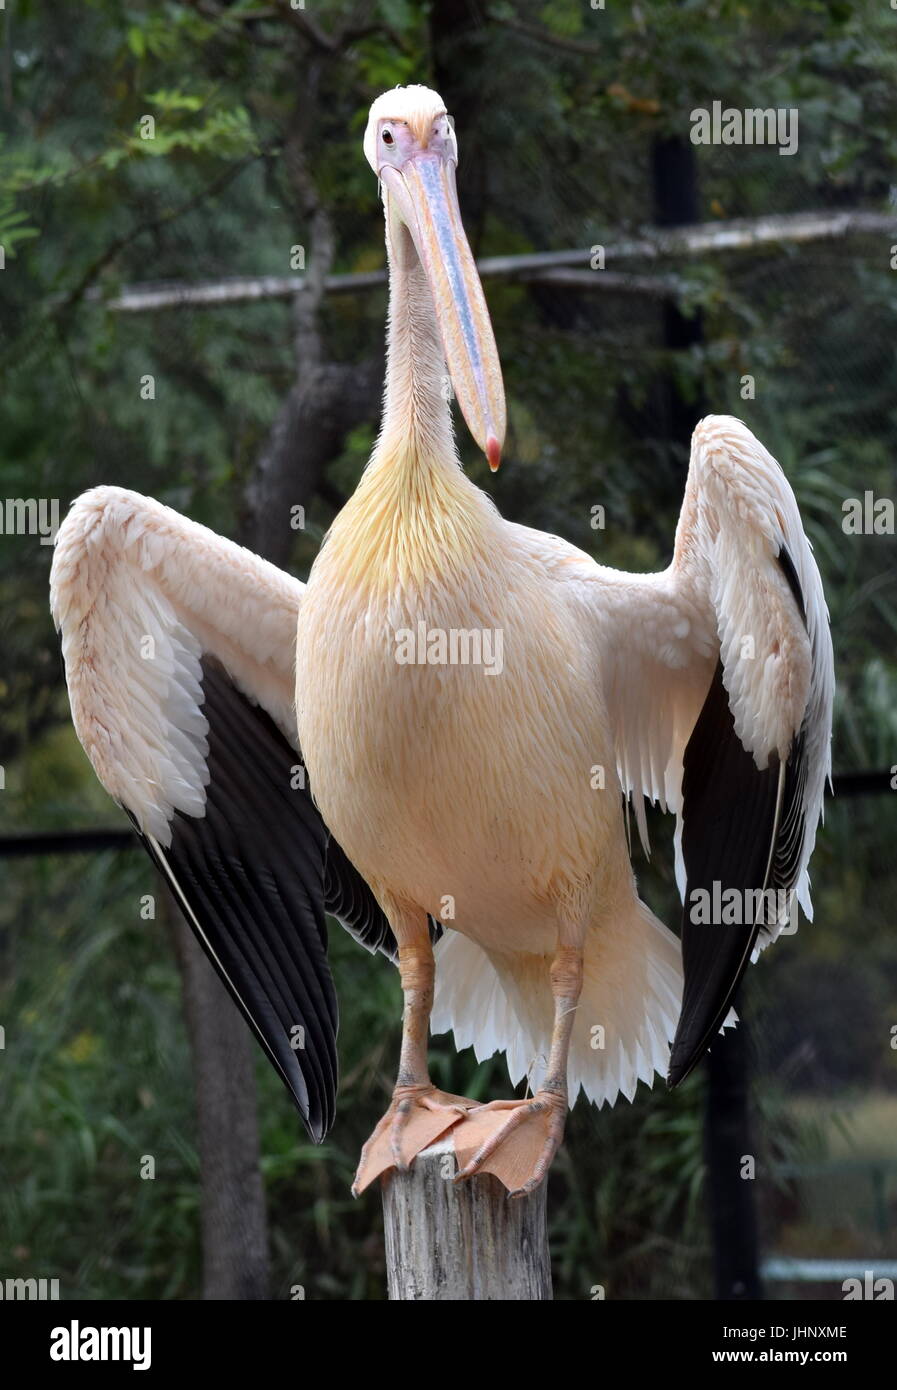 Beautiful Pelican with spread wings standing on a log Stock Photo